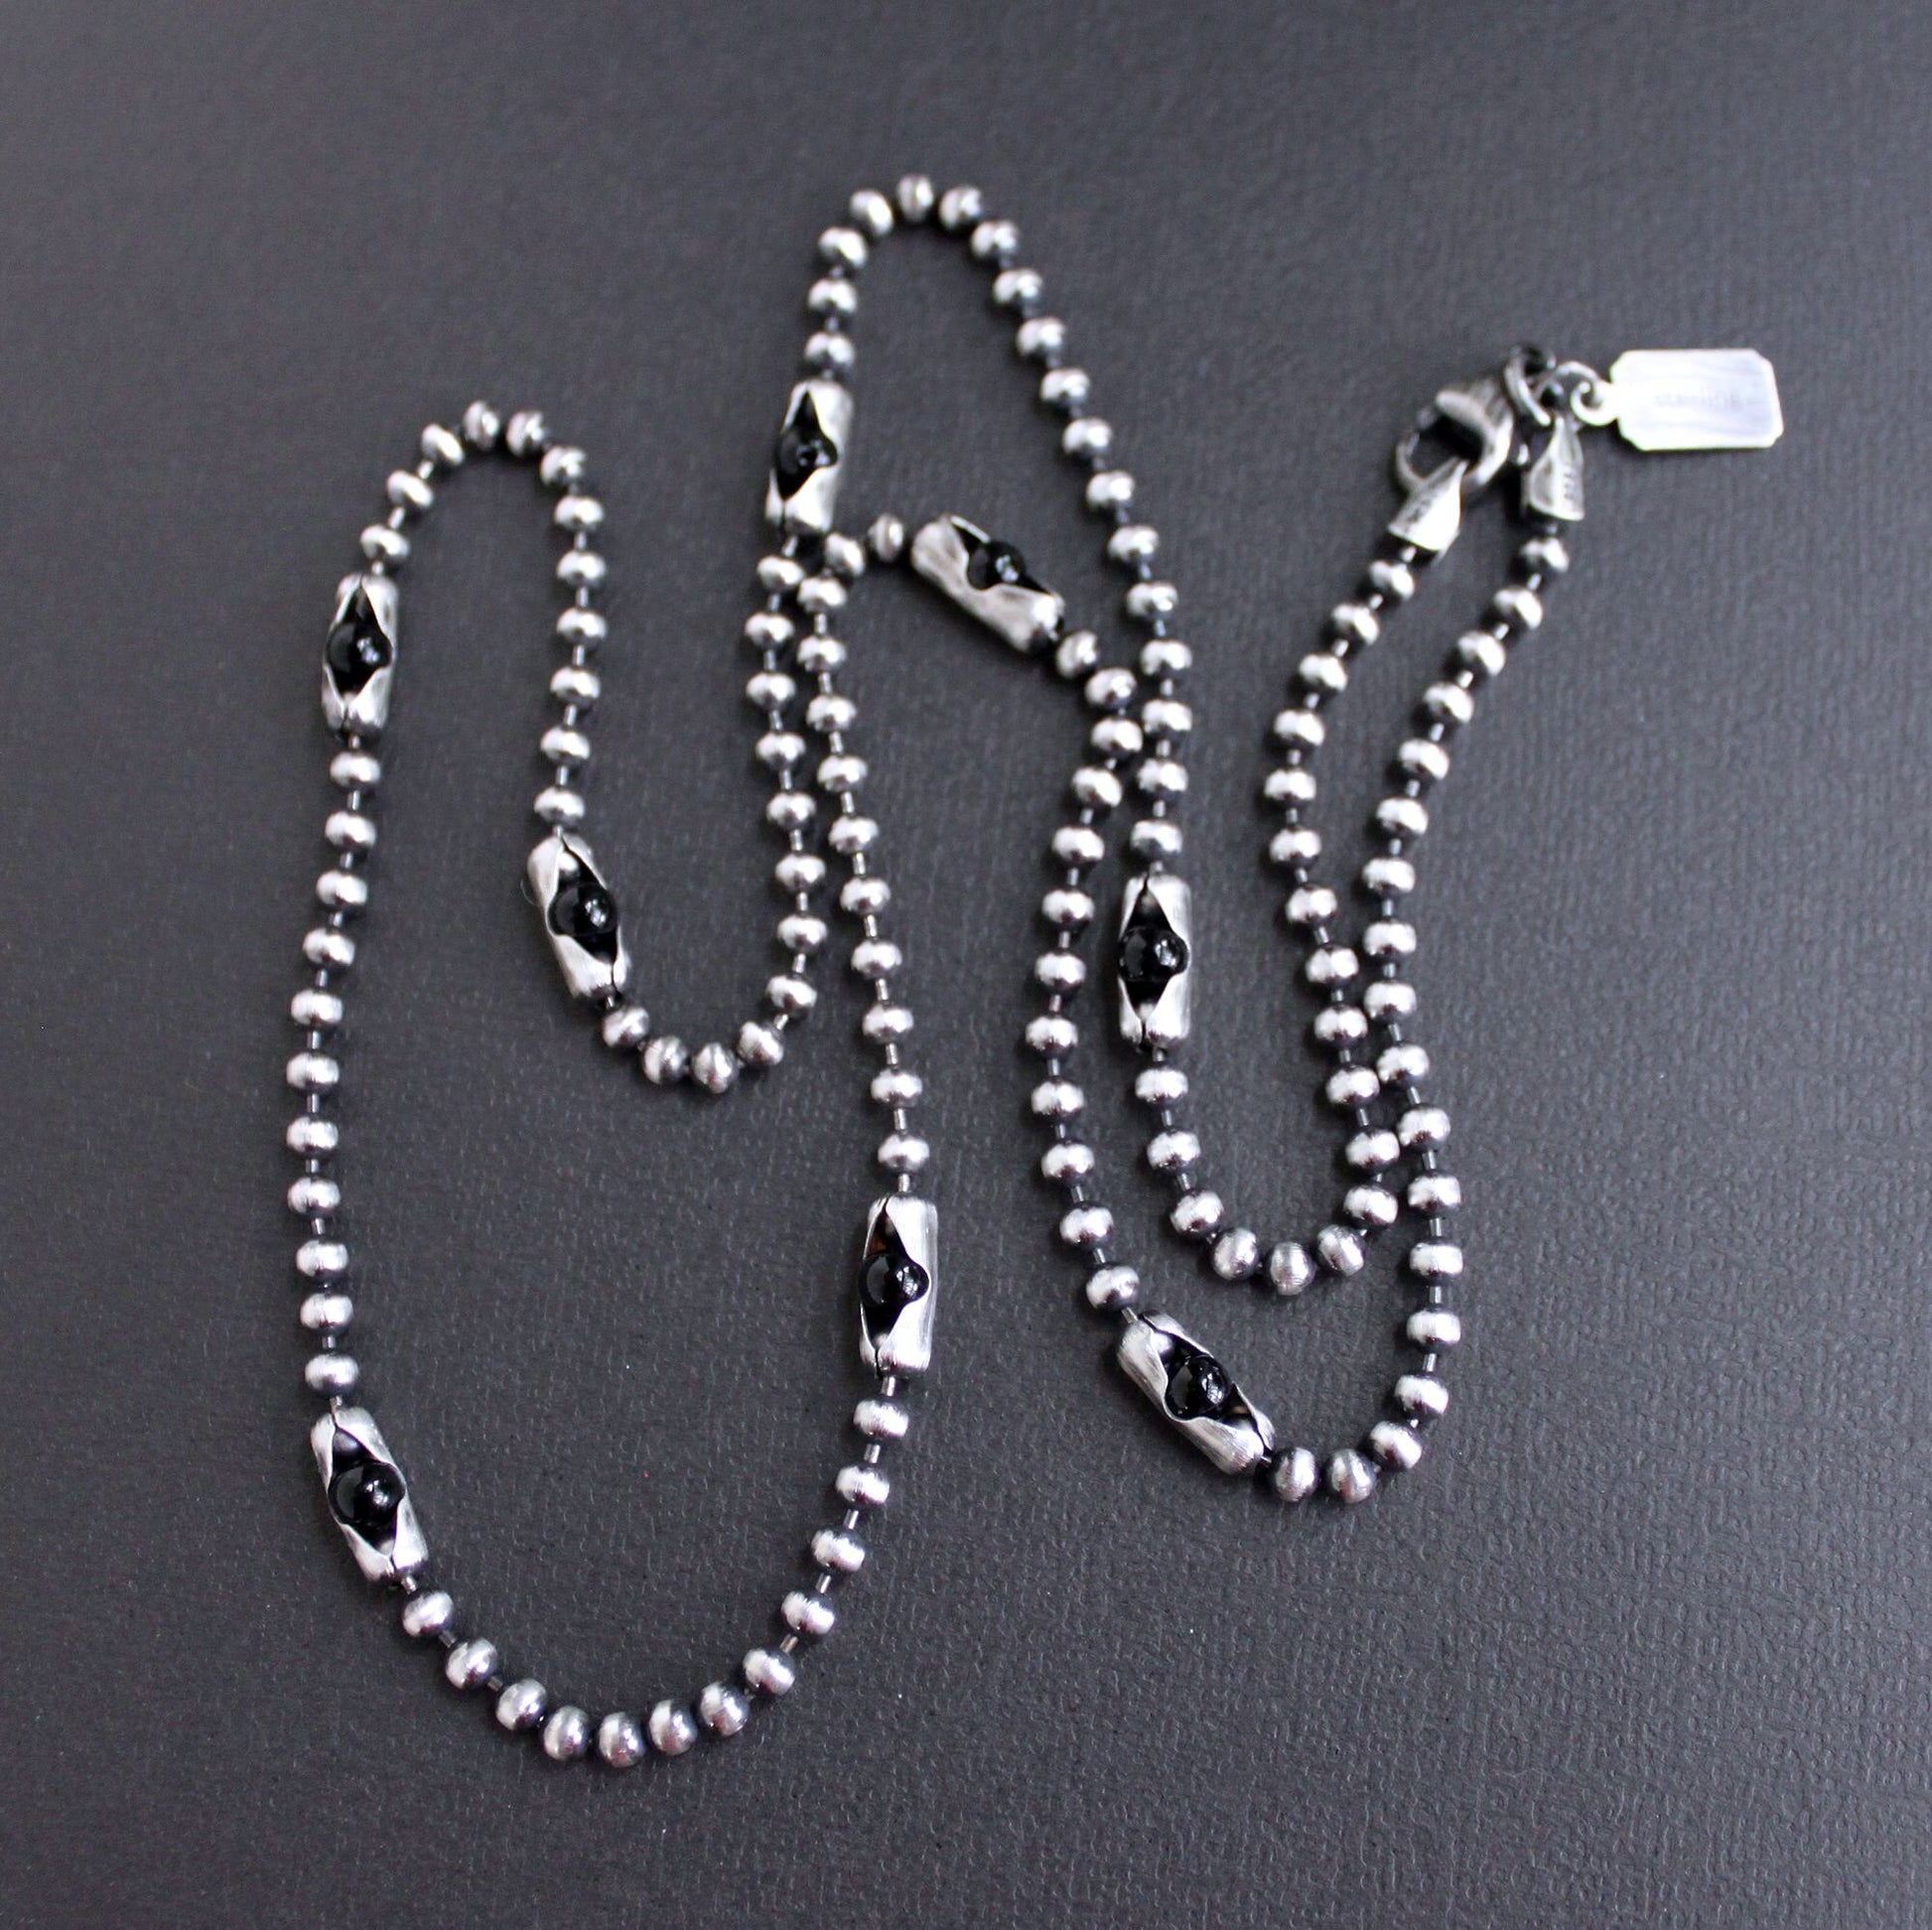 Black Onyx Bead and Silver Chain Necklace